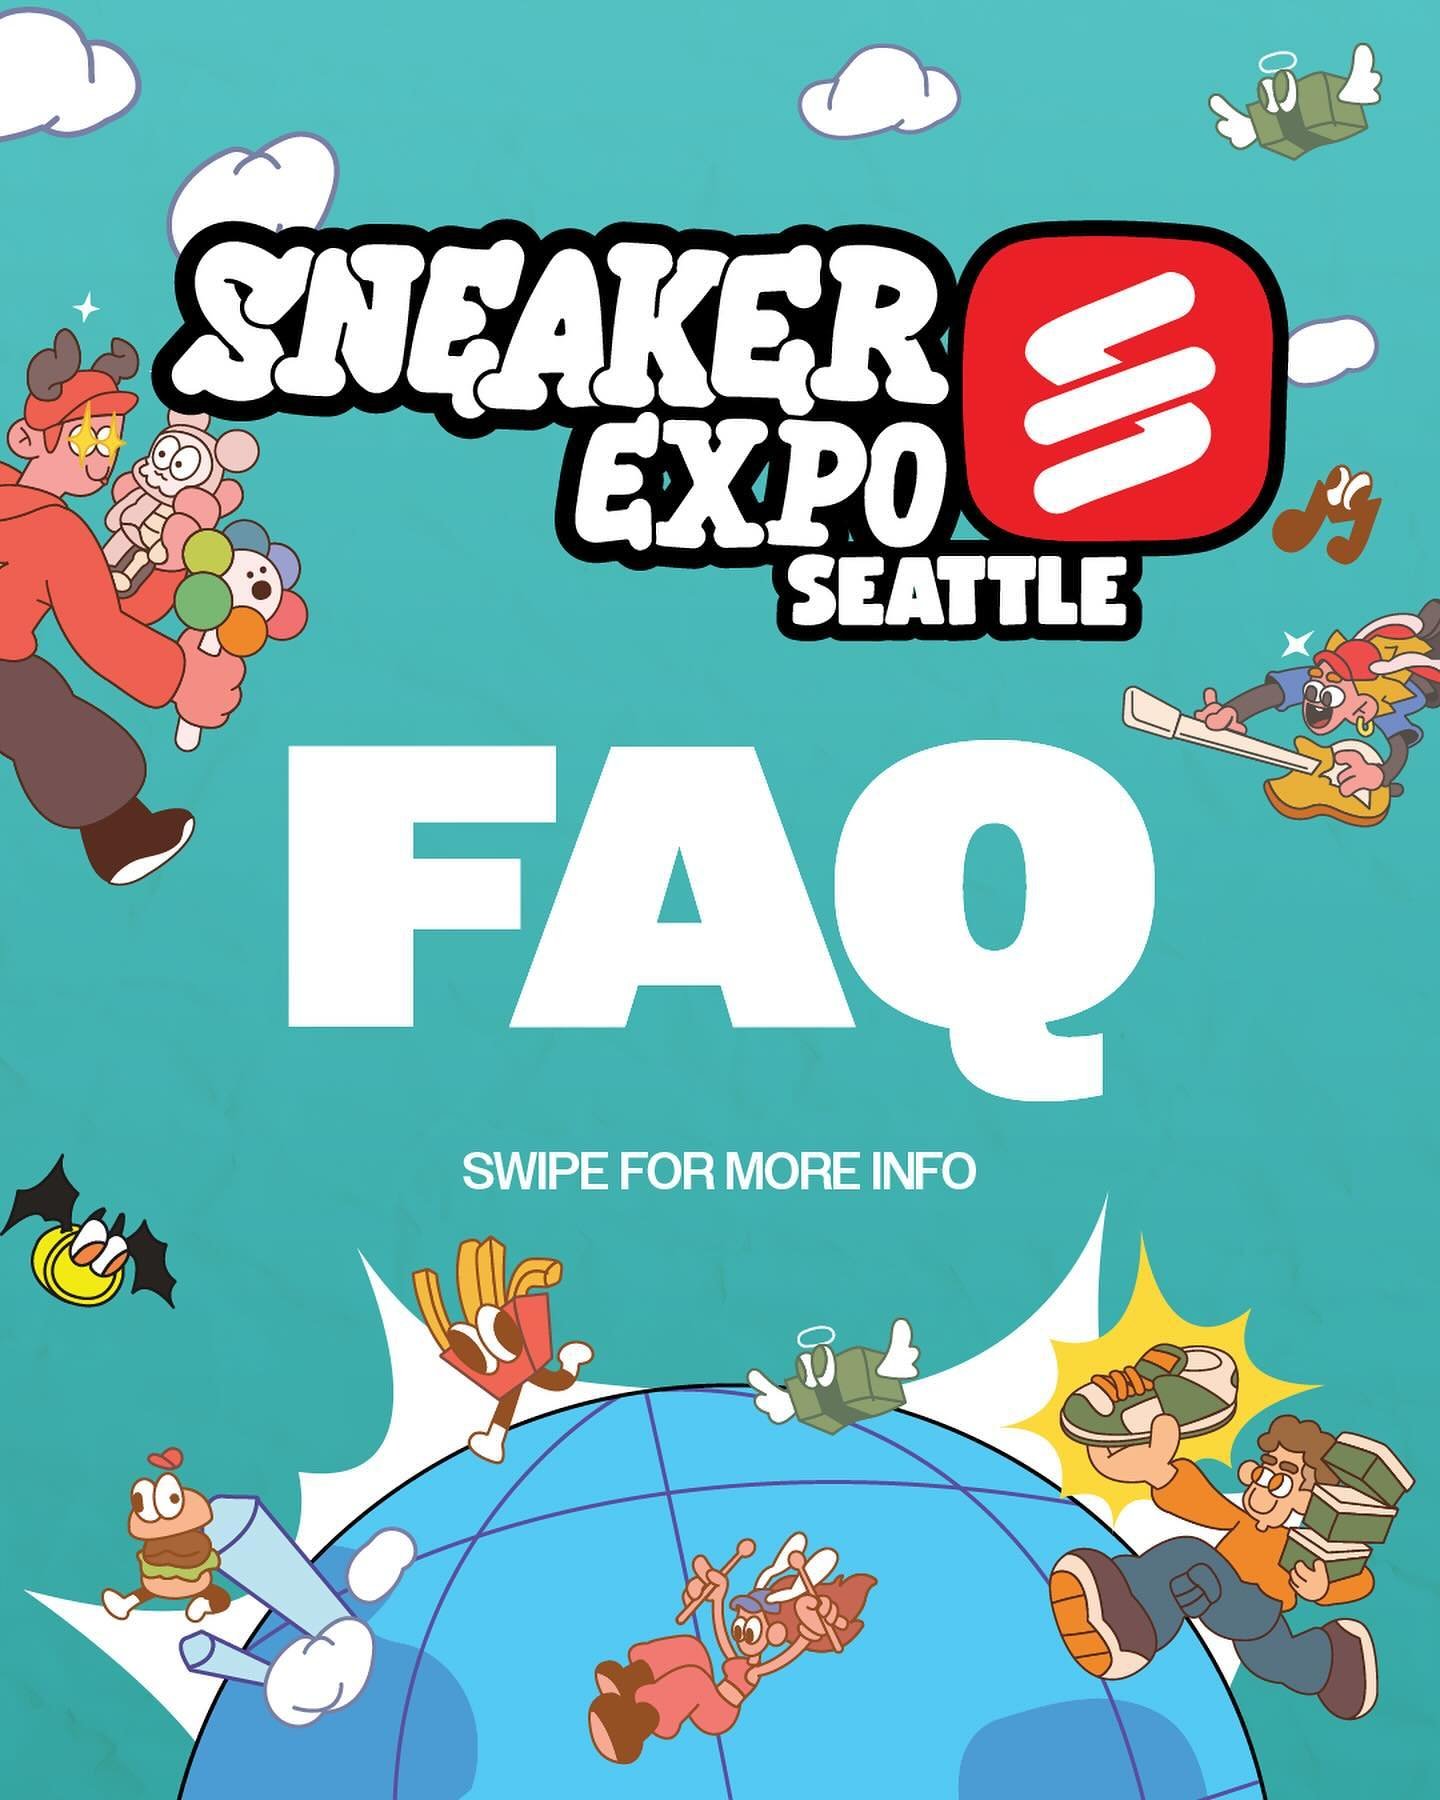 Everything you should know before coming to Sneaker Expo Seattle! 

See y&rsquo;all tomorrow! This is the one event you don&rsquo;t want to Miss!

🐙 Seattle Convention Center
🗓️ May 18 - 19 | 11am - 7pm
www.sneakerexpo.com